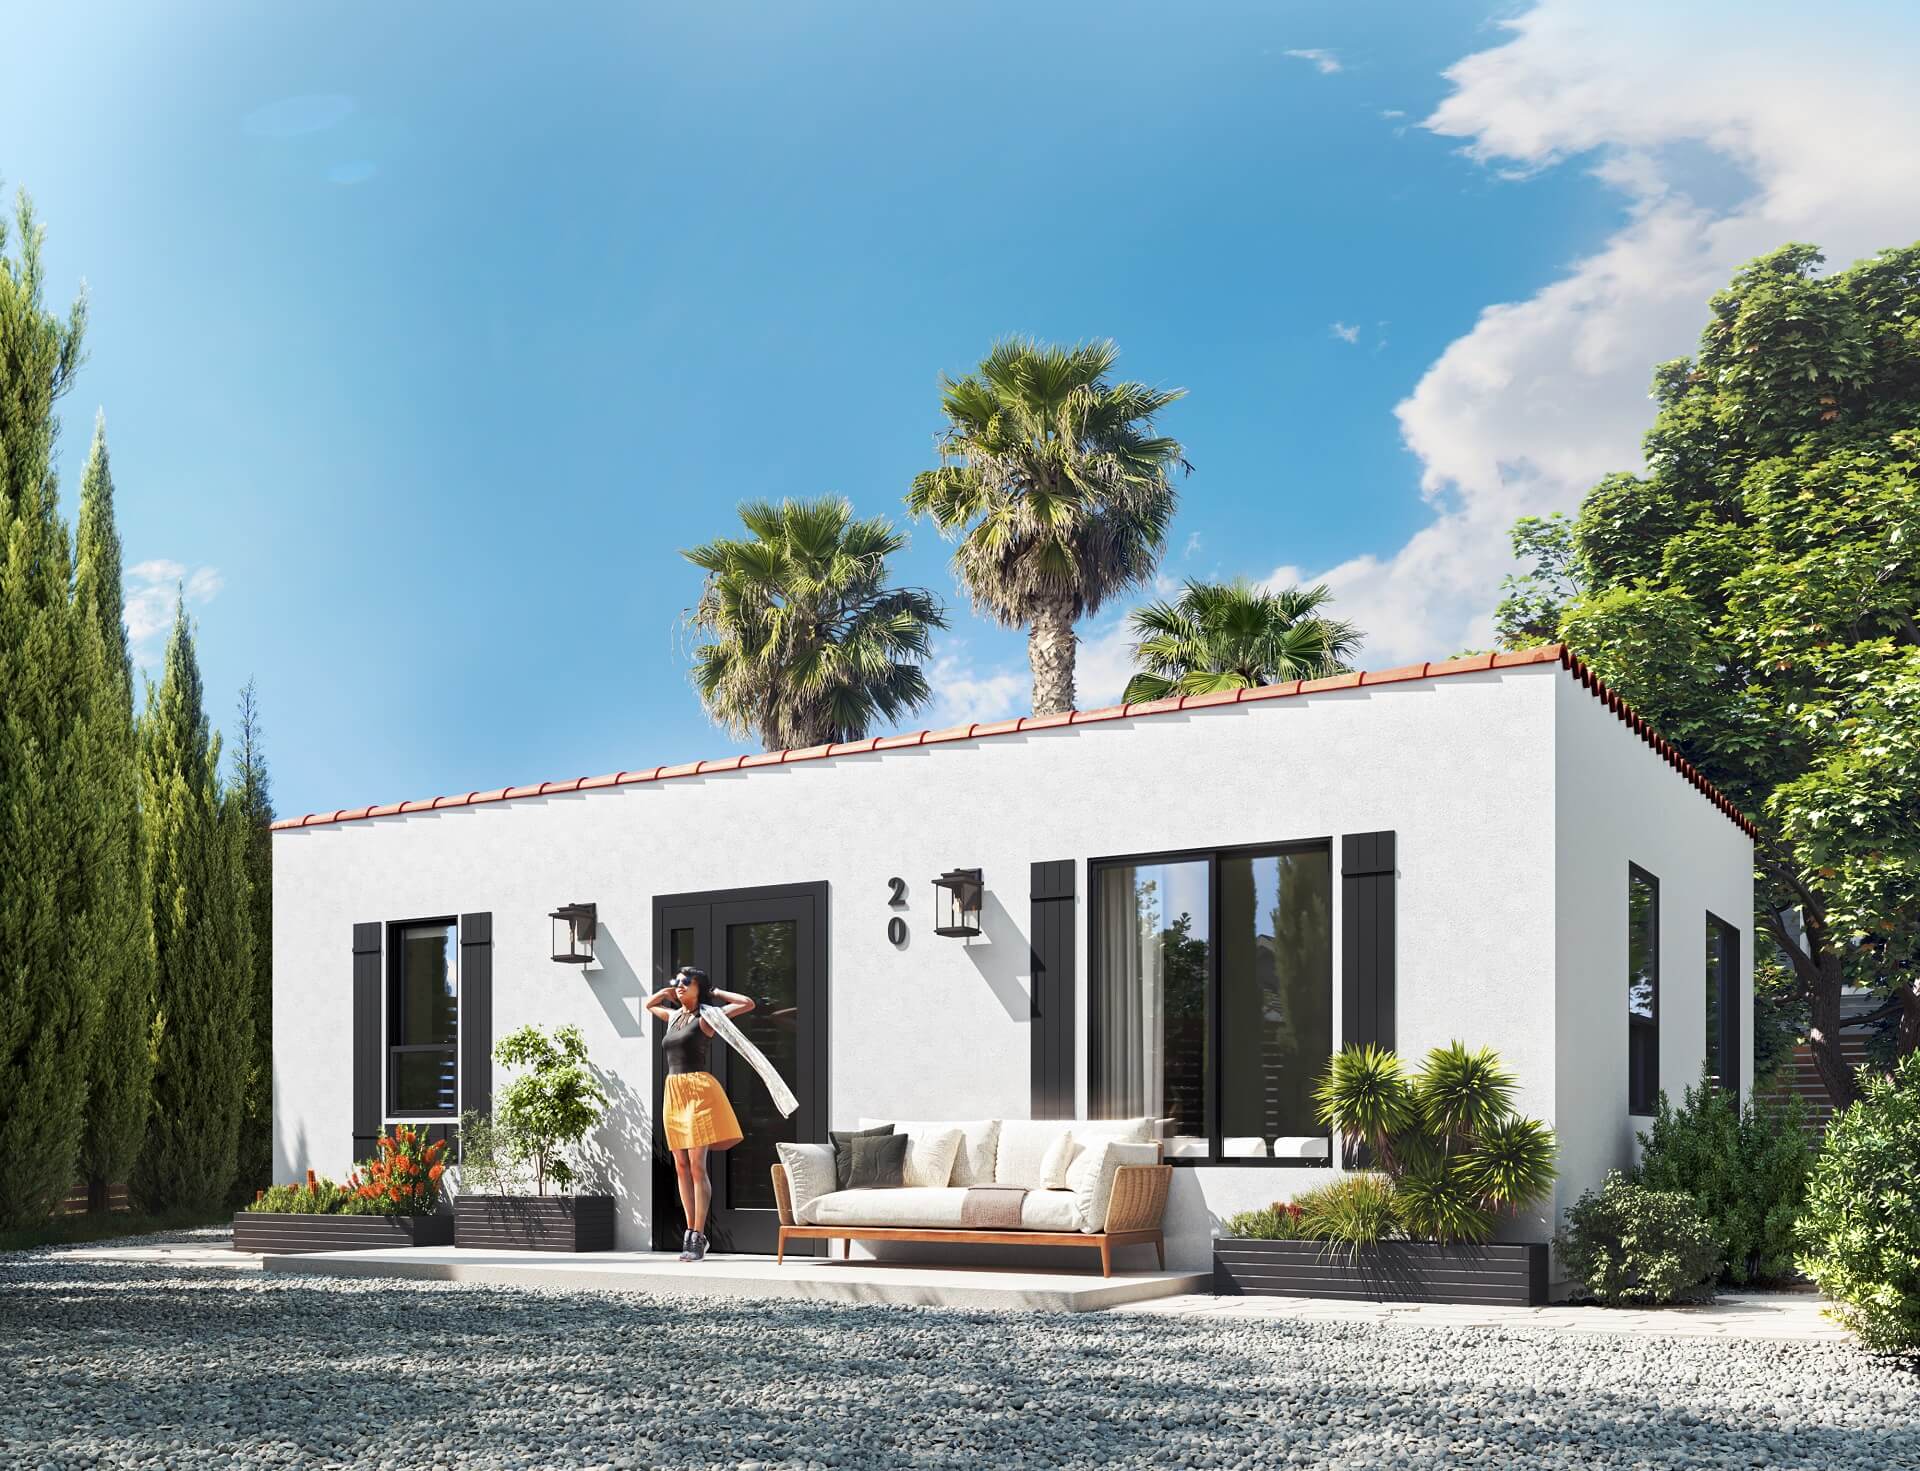 3D Visualization for Projects in California: Spanish-style Bungalow